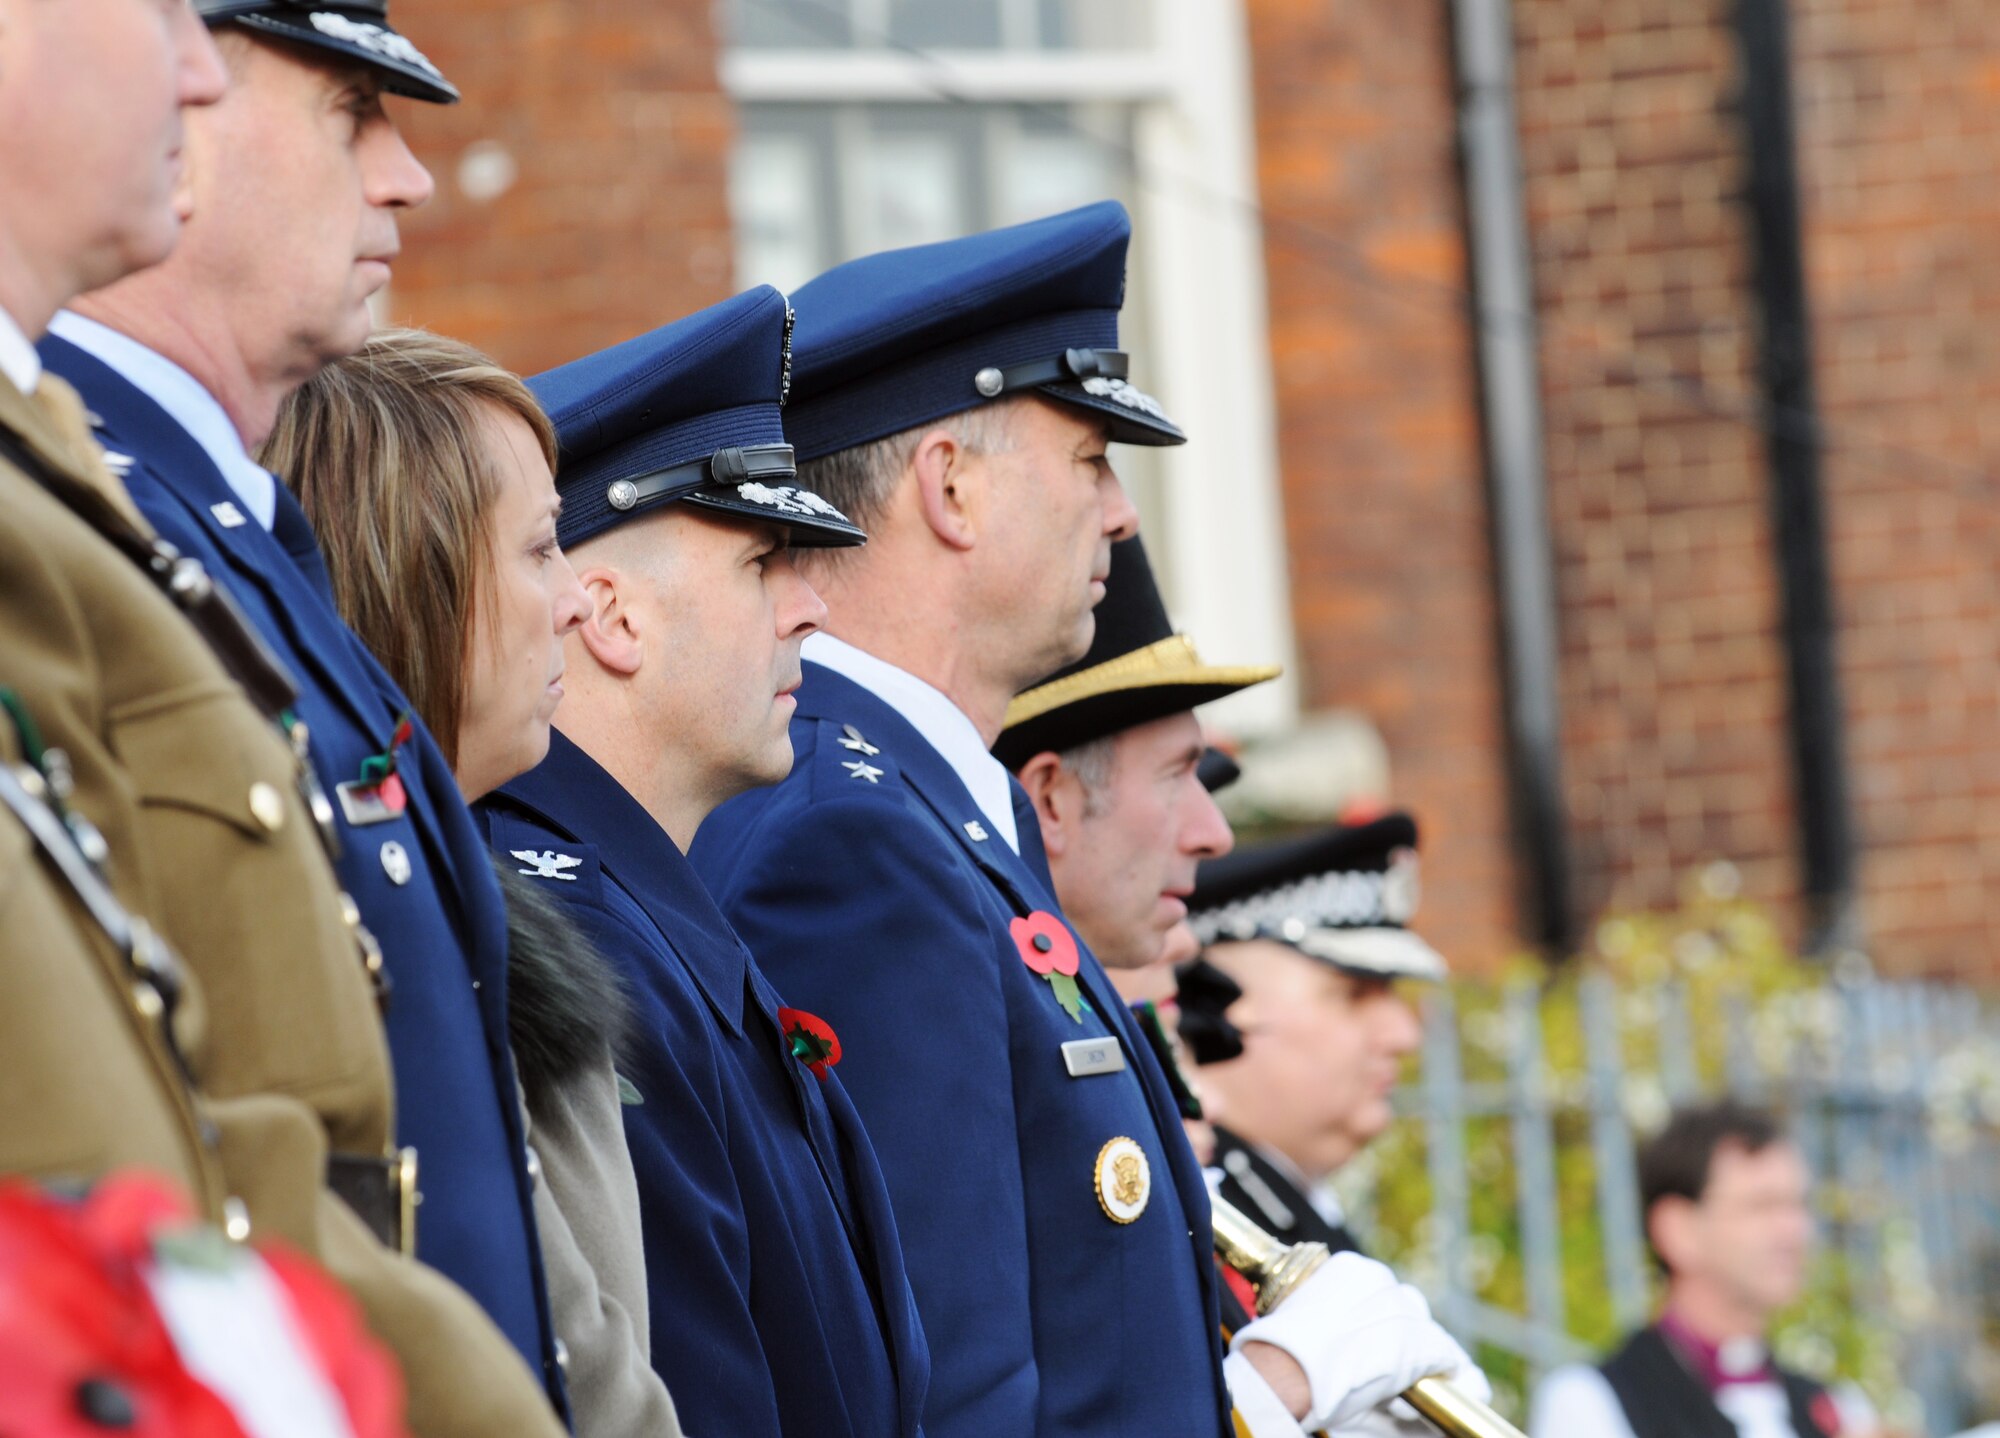 RAF MILDENHALL, England -- The Air Force-blue uniforms of Cols. Lawrence Reed (left), Chad Manske (middle) and Maj. Gen. Mark Zamzow stand out among local dignitaries at a Remembrance Day ceremony at Angel Hill, Bury St. Edmunds Nov. 9. General Zamzow, 3rd Air Force vice commander, presented a poppy wreath along with Colonels Manske, 100th Air Refueling Wing commander, and Reed, 48th Fighter Wing vice commander, at the base of a memorial. British and American forces participated in the event that was one of thousands across the country. (U.S. Air Force photo/Senior Airman Thomas Trower)